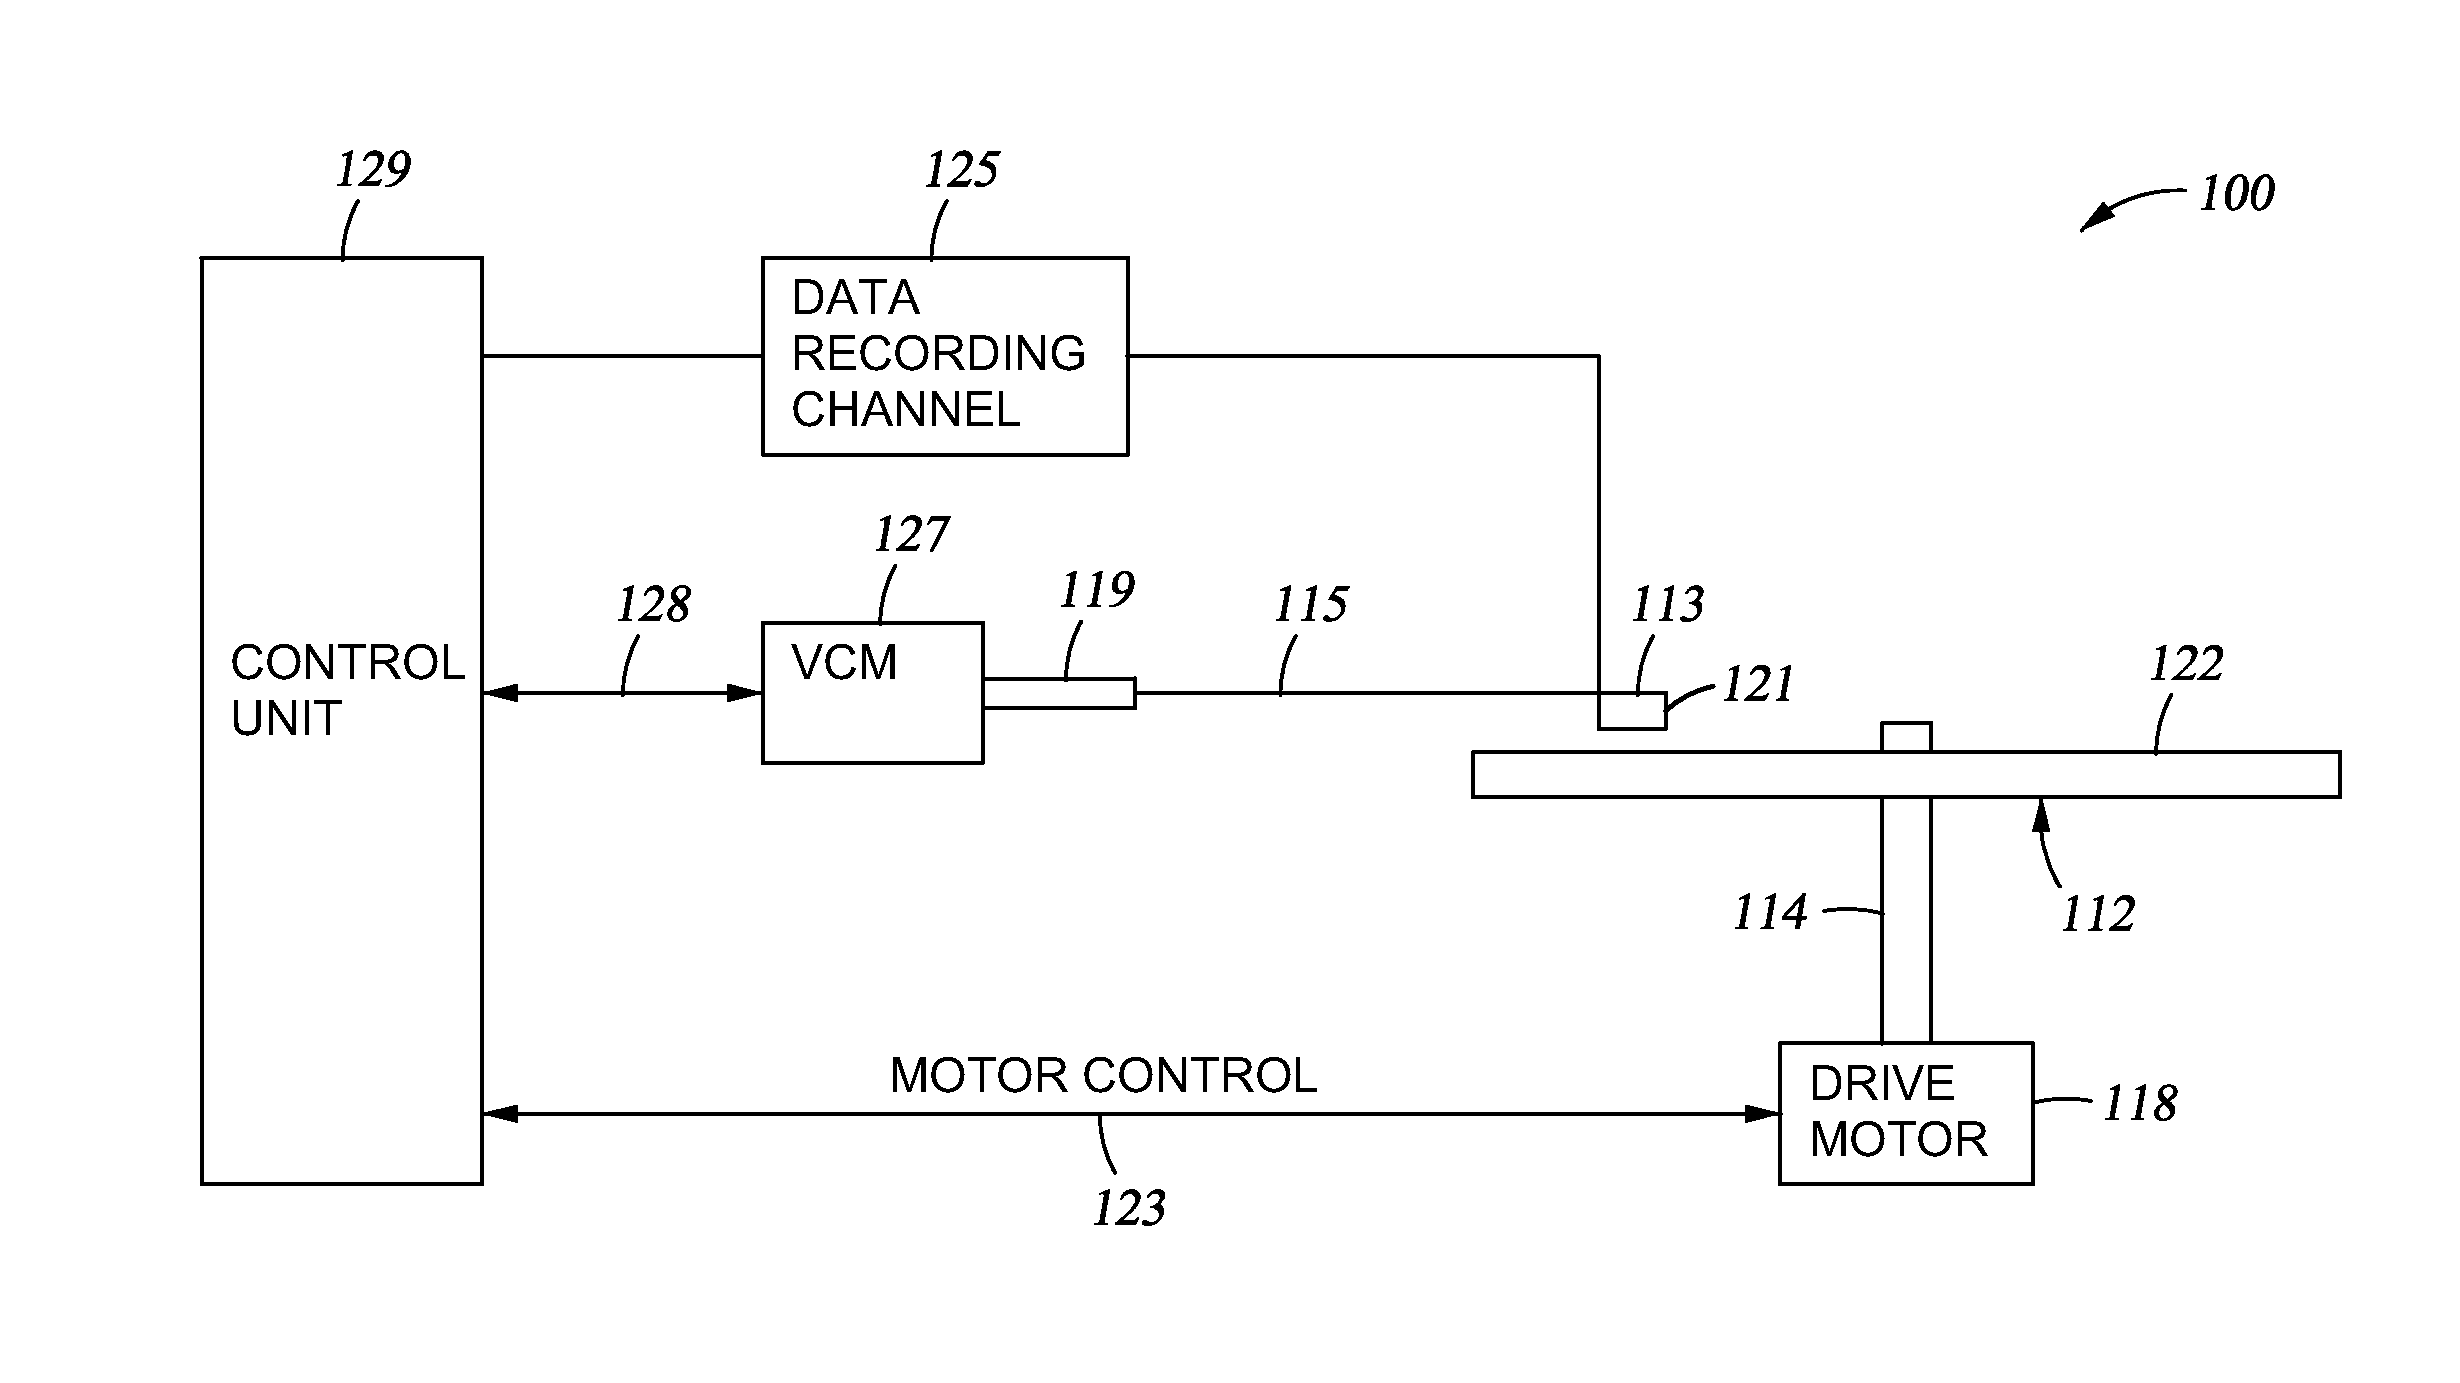 Hamr head spot-size converters with secondary index confinement